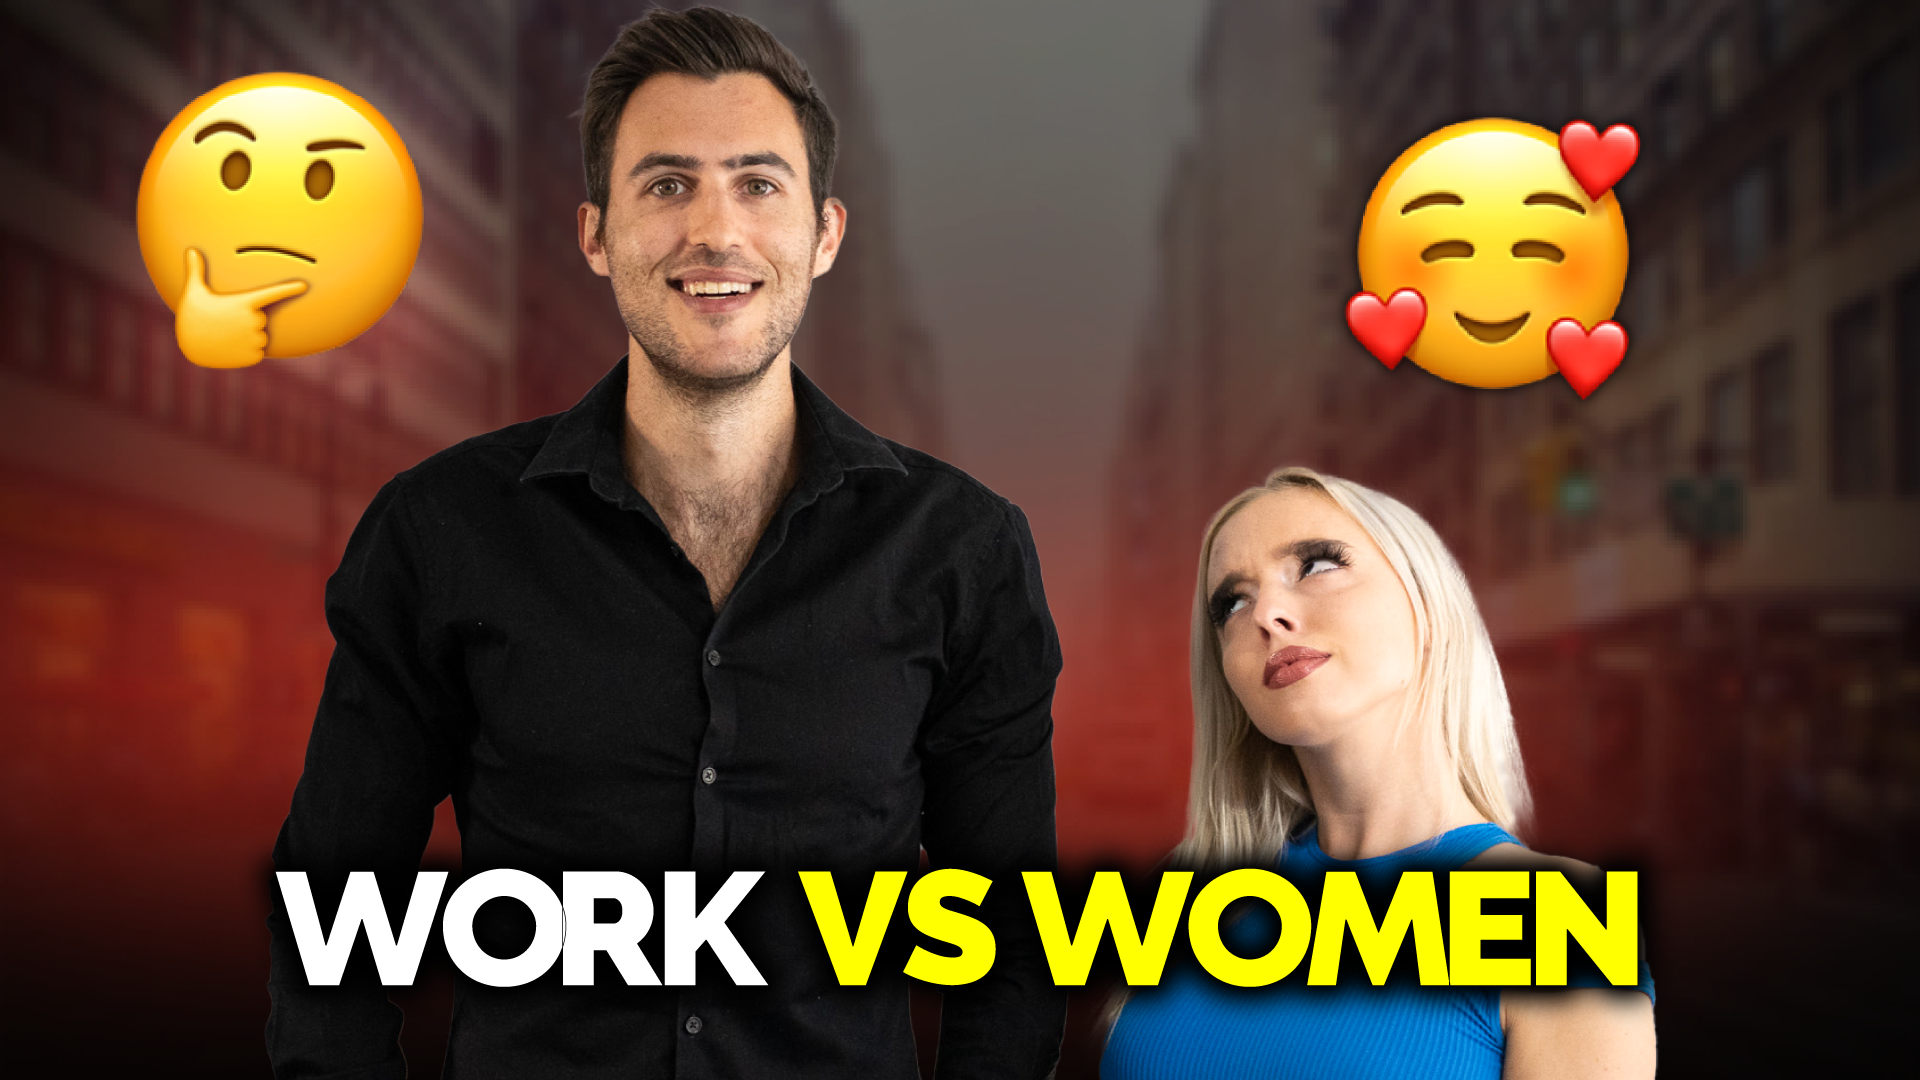 How To Balance Work VS Women (THE TRUTH)